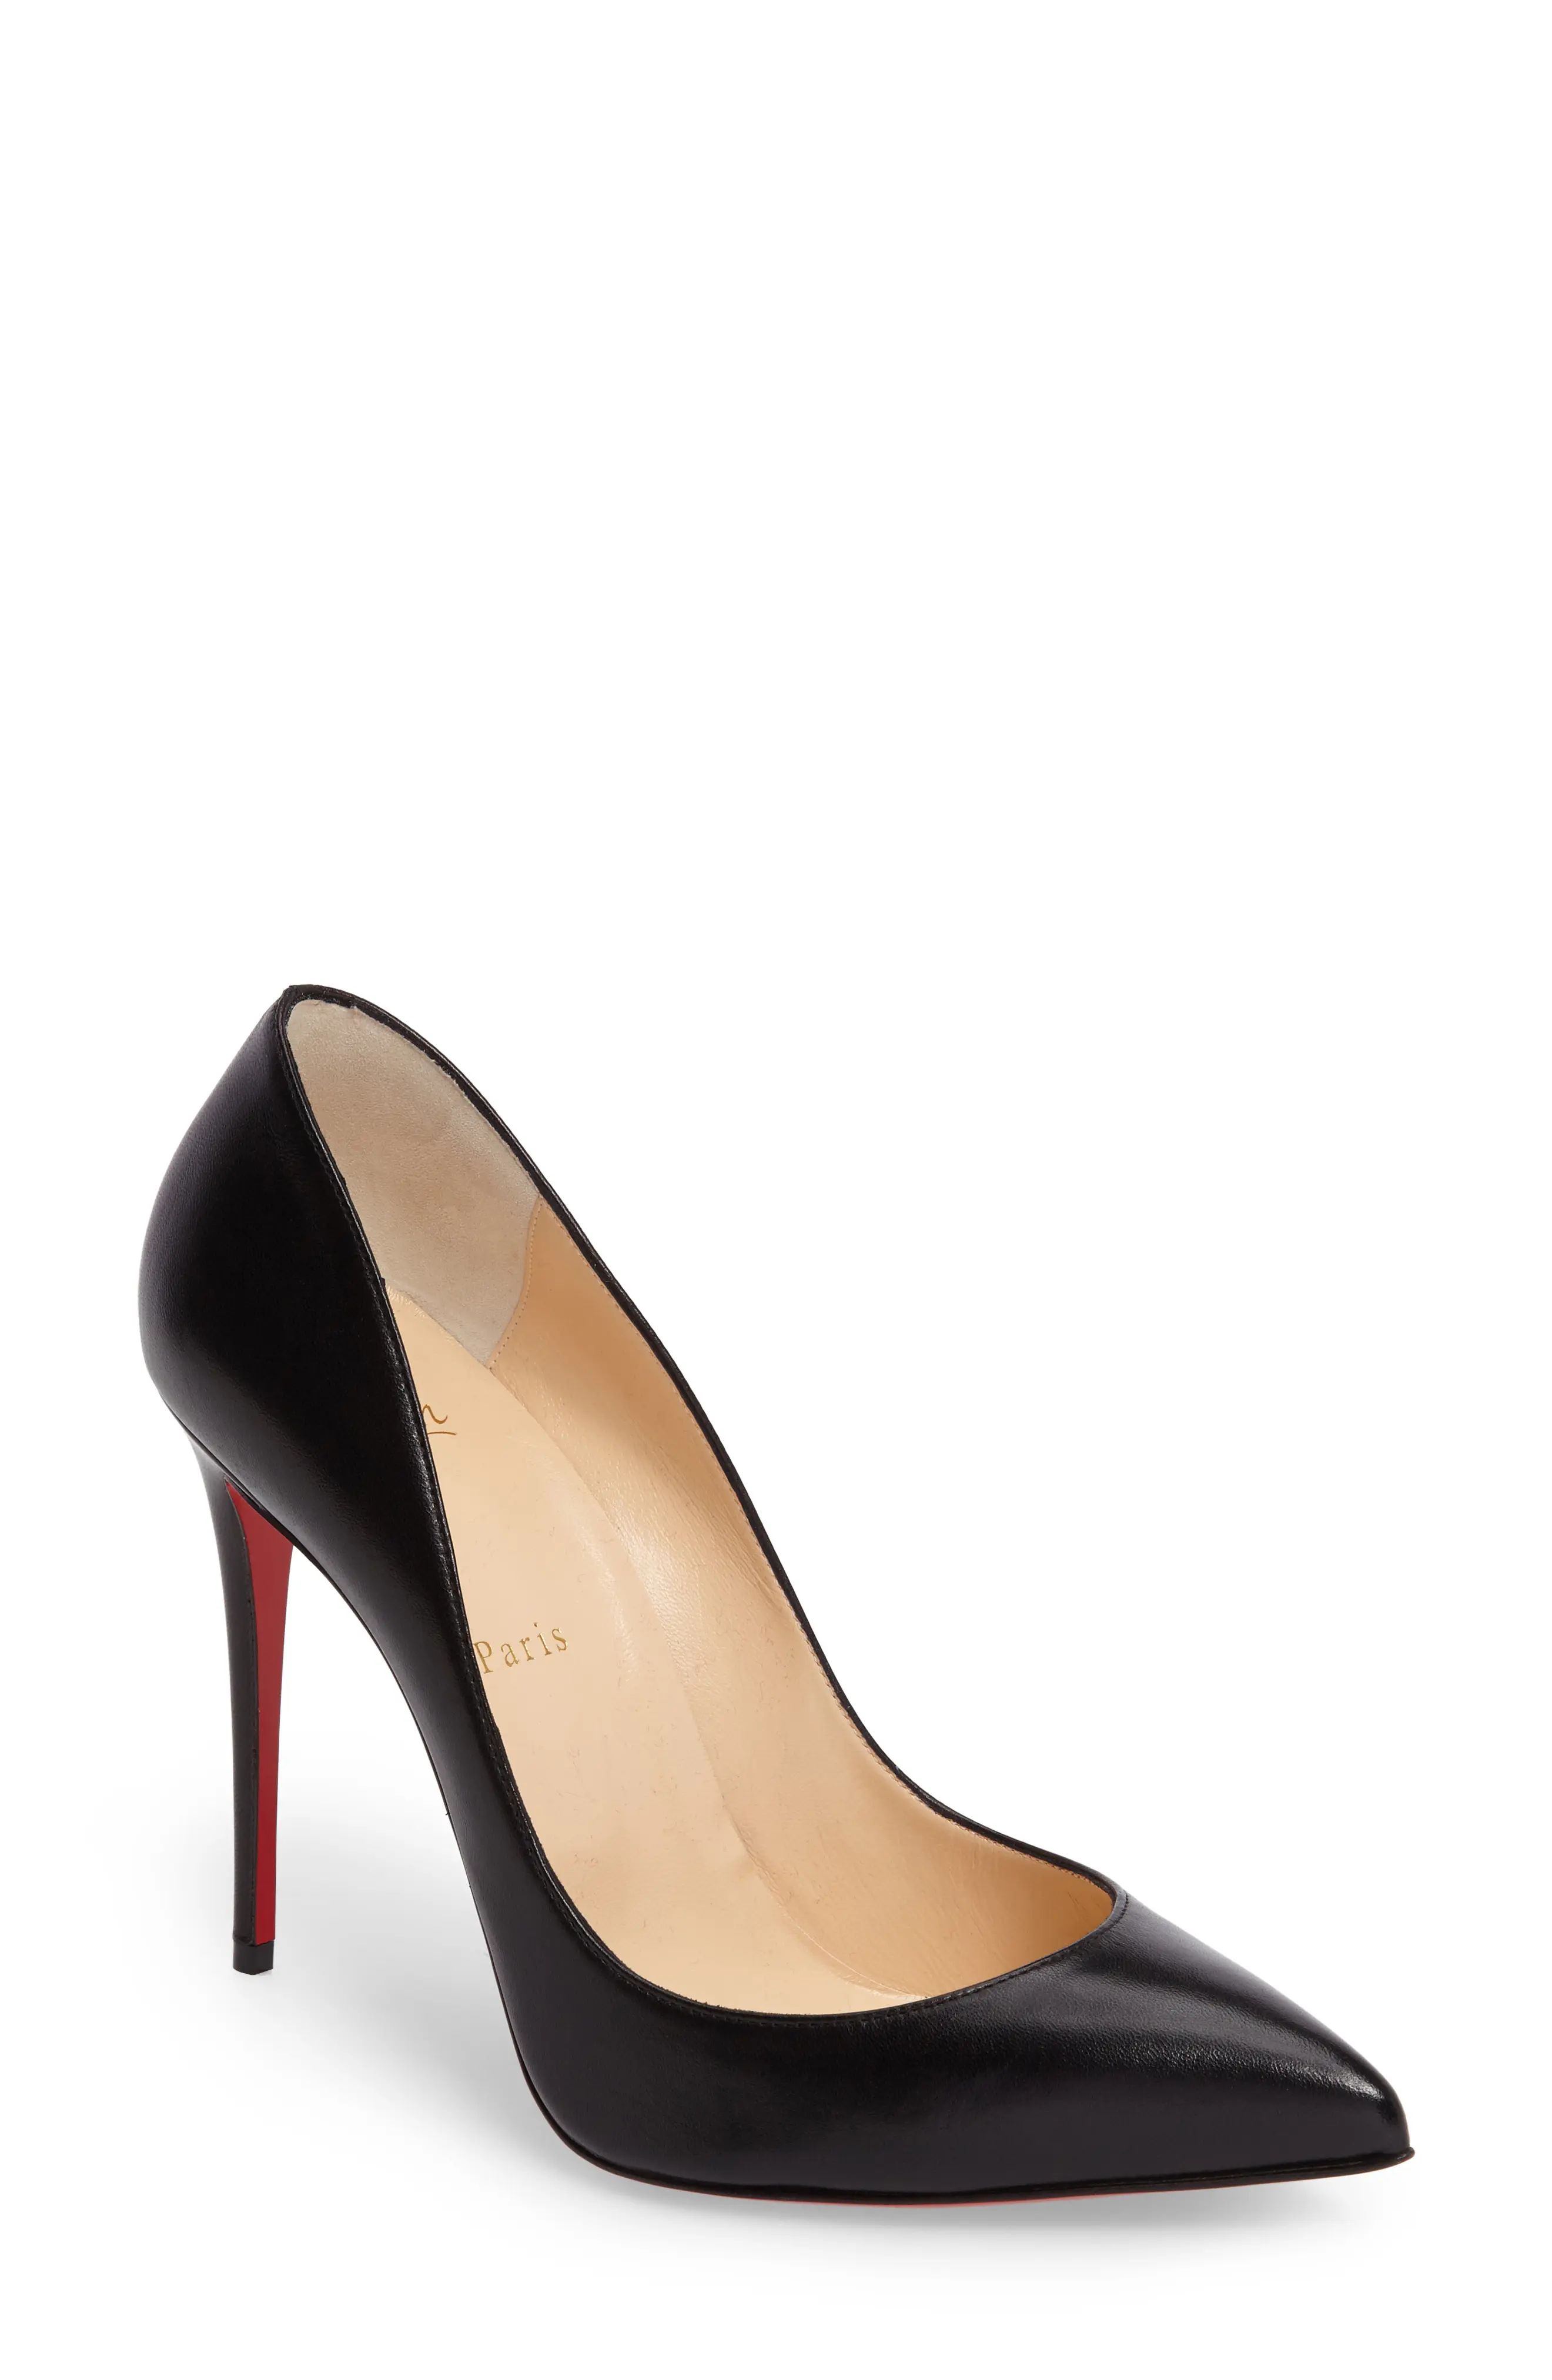 Women's Christian Louboutin Pigalle Follies Pointy Toe Pump, Size 4US - Black | Nordstrom